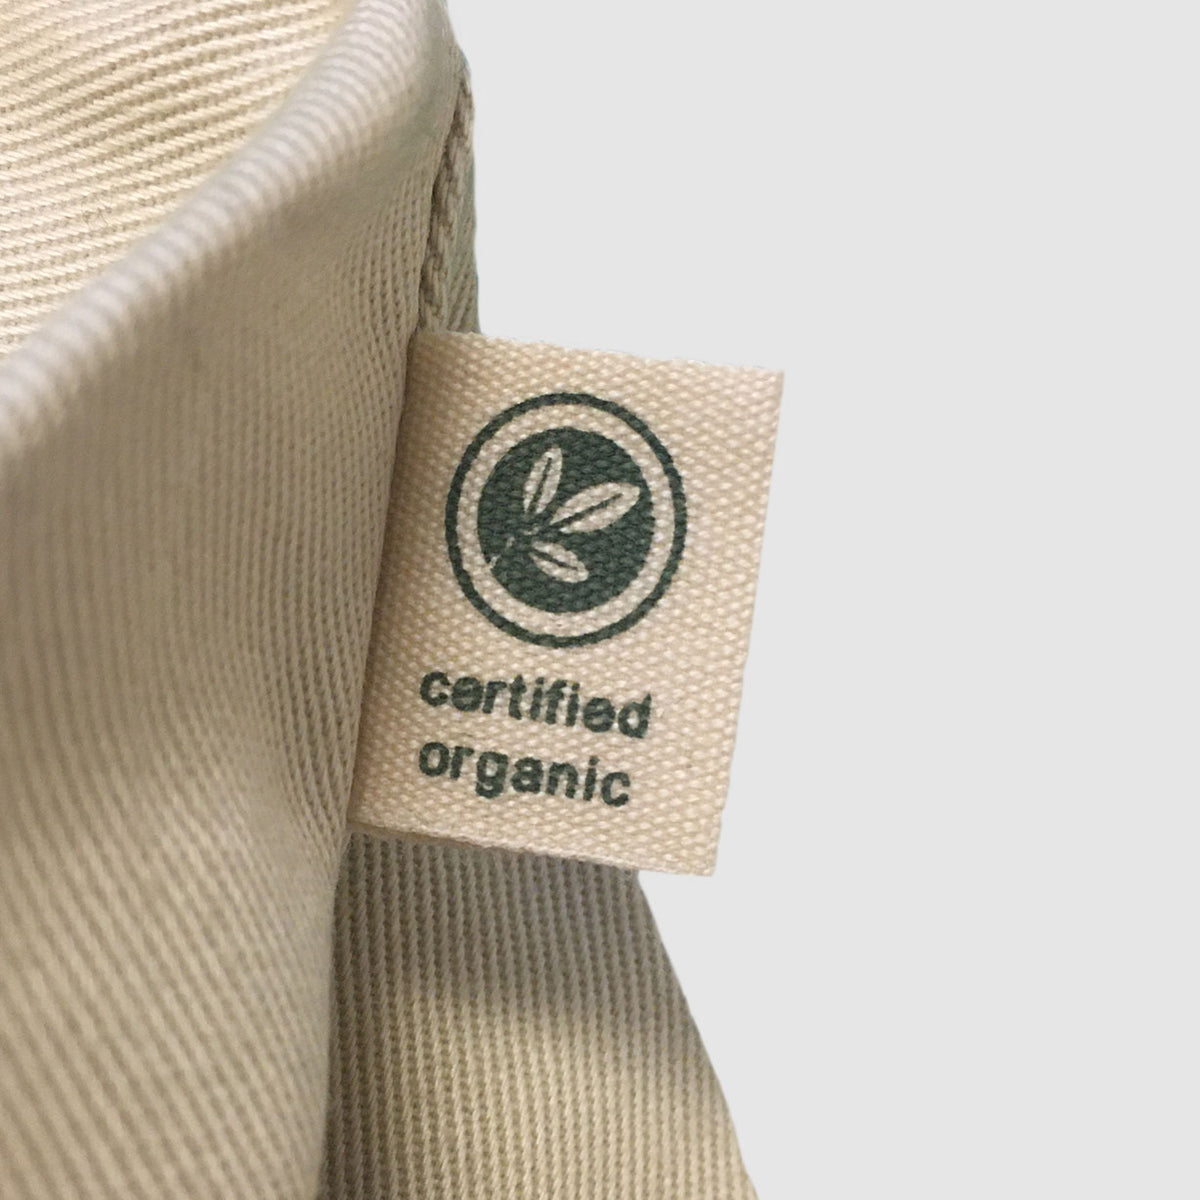 Certified Organic Cotton Canvas